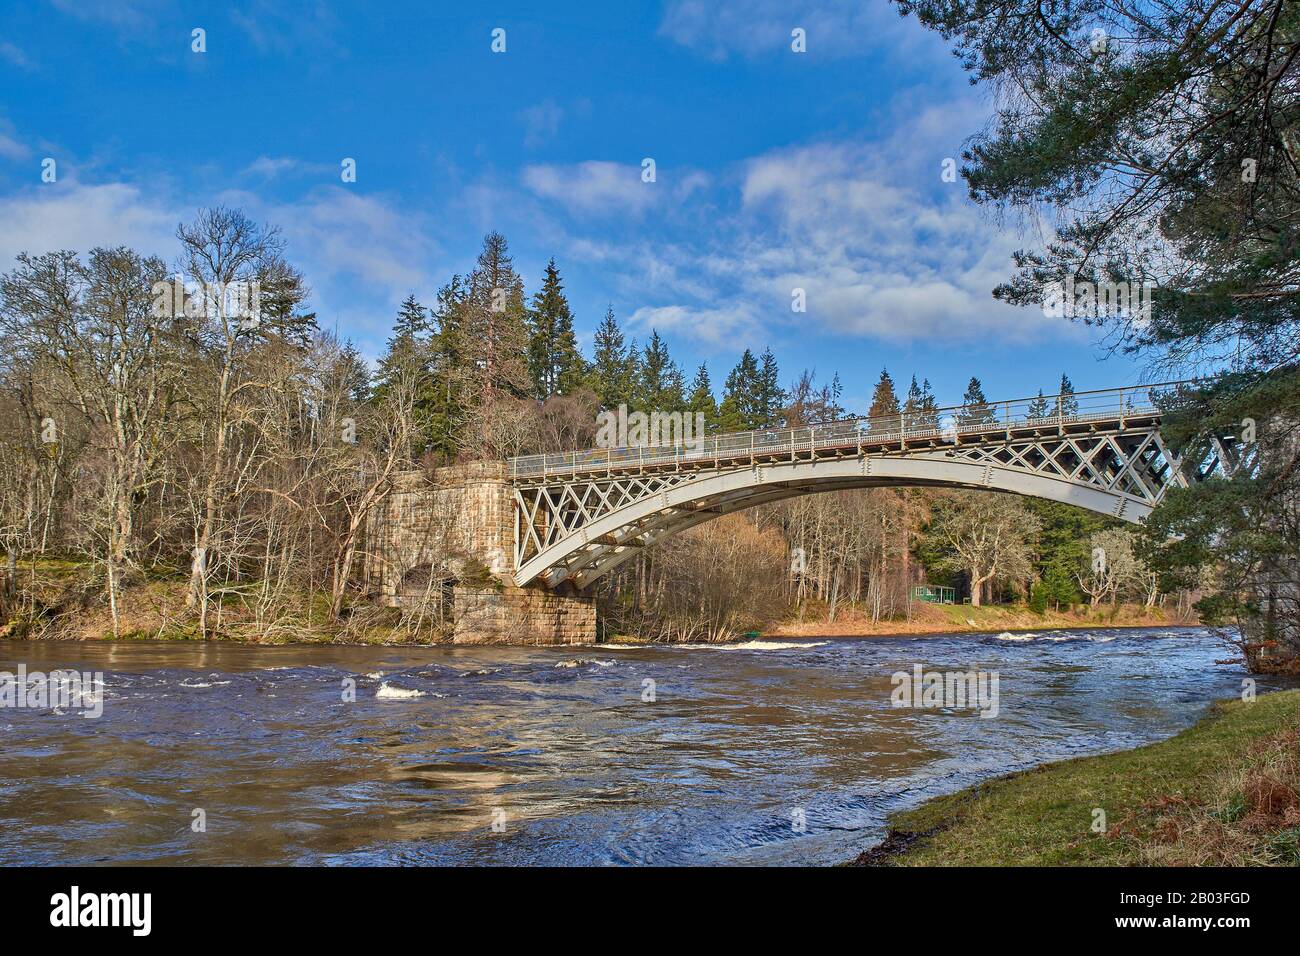 CARRON VILLAGE MORAY SCOTLAND A VIEW OF THE STRUCTURE OF UNIQUE CARRON ROAD AND OLD RAIL BRIDGE WHICH CROSSES THE RIVER SPEY AND GREEN FISHING HUT Stock Photo